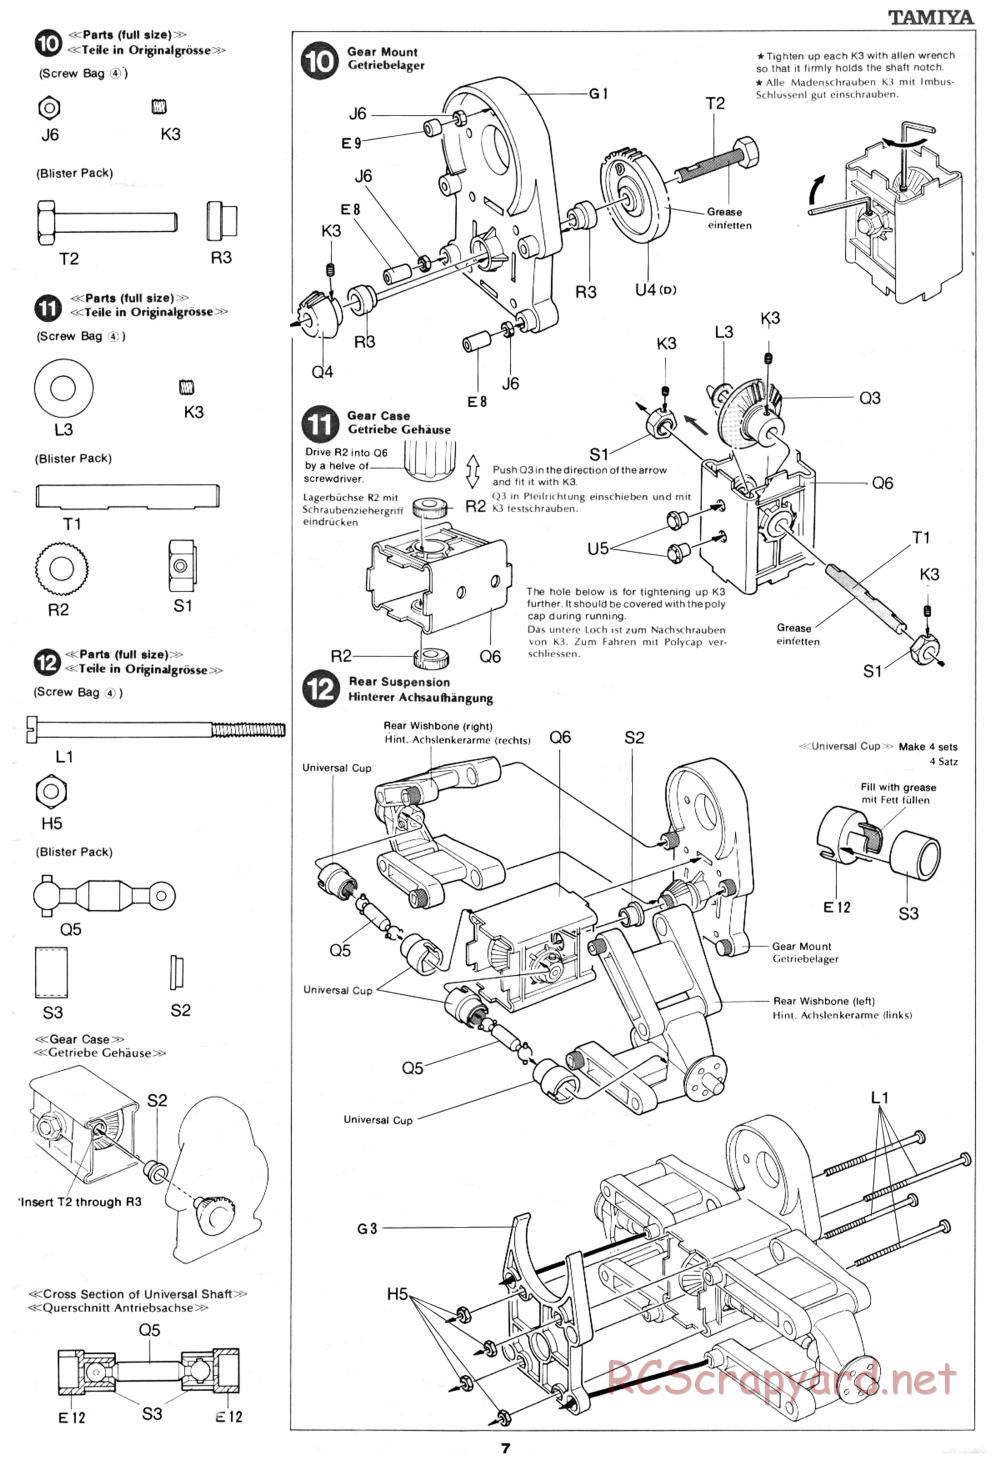 Tamiya - XR311 Combat Support Vehicle (1977) Chassis - Manual - Page 7